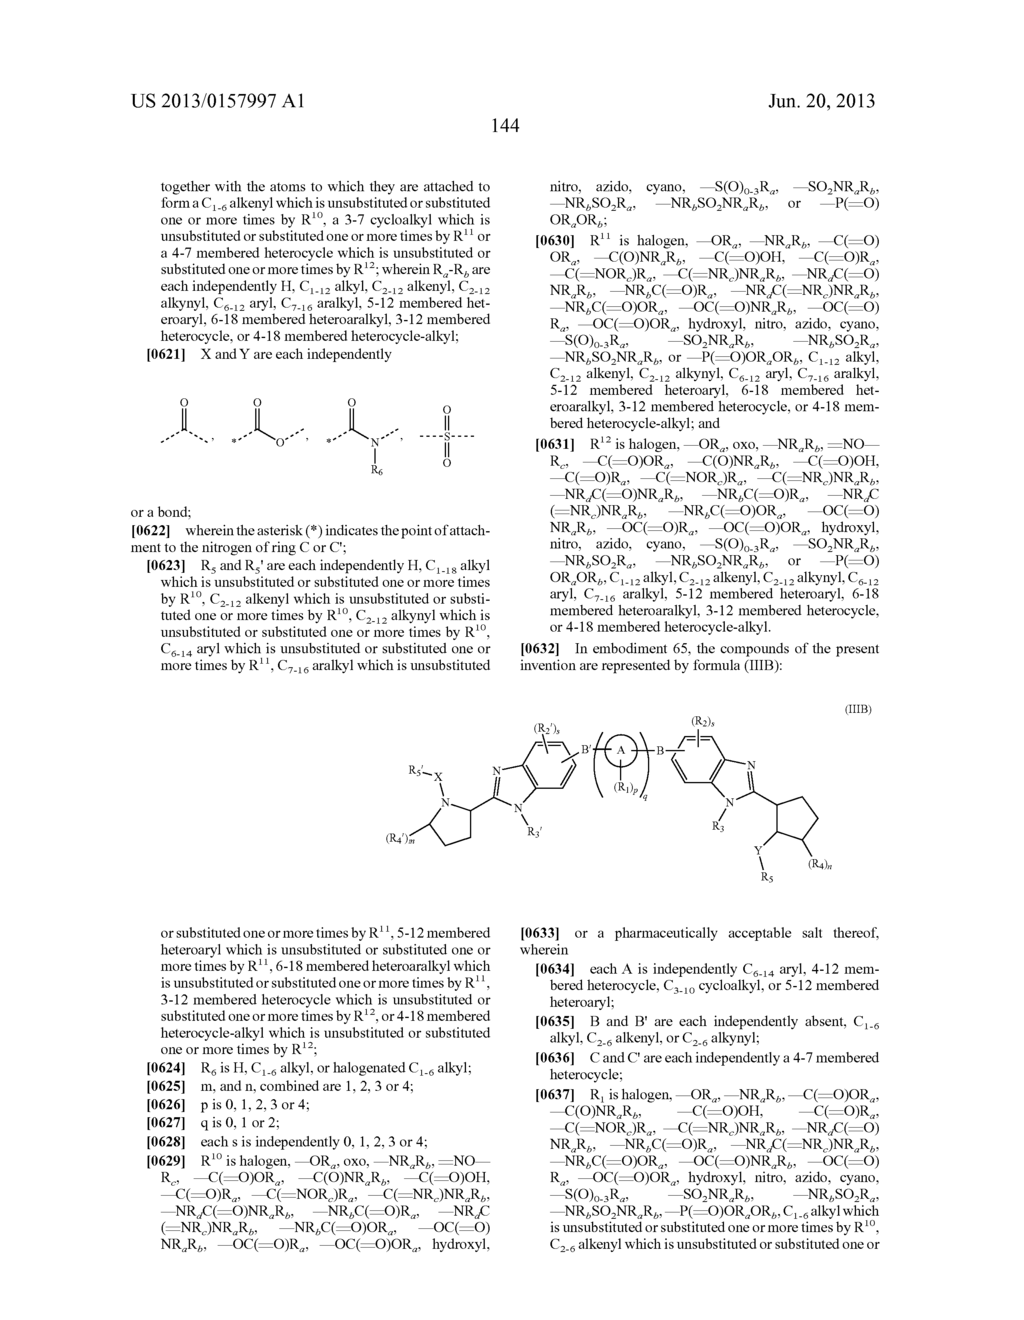 BENZIMIDAZOLE ANALOGUES FOR THE TREATMENT OR PREVENTION OF FLAVIVIRUS     INFECTIONS - diagram, schematic, and image 145